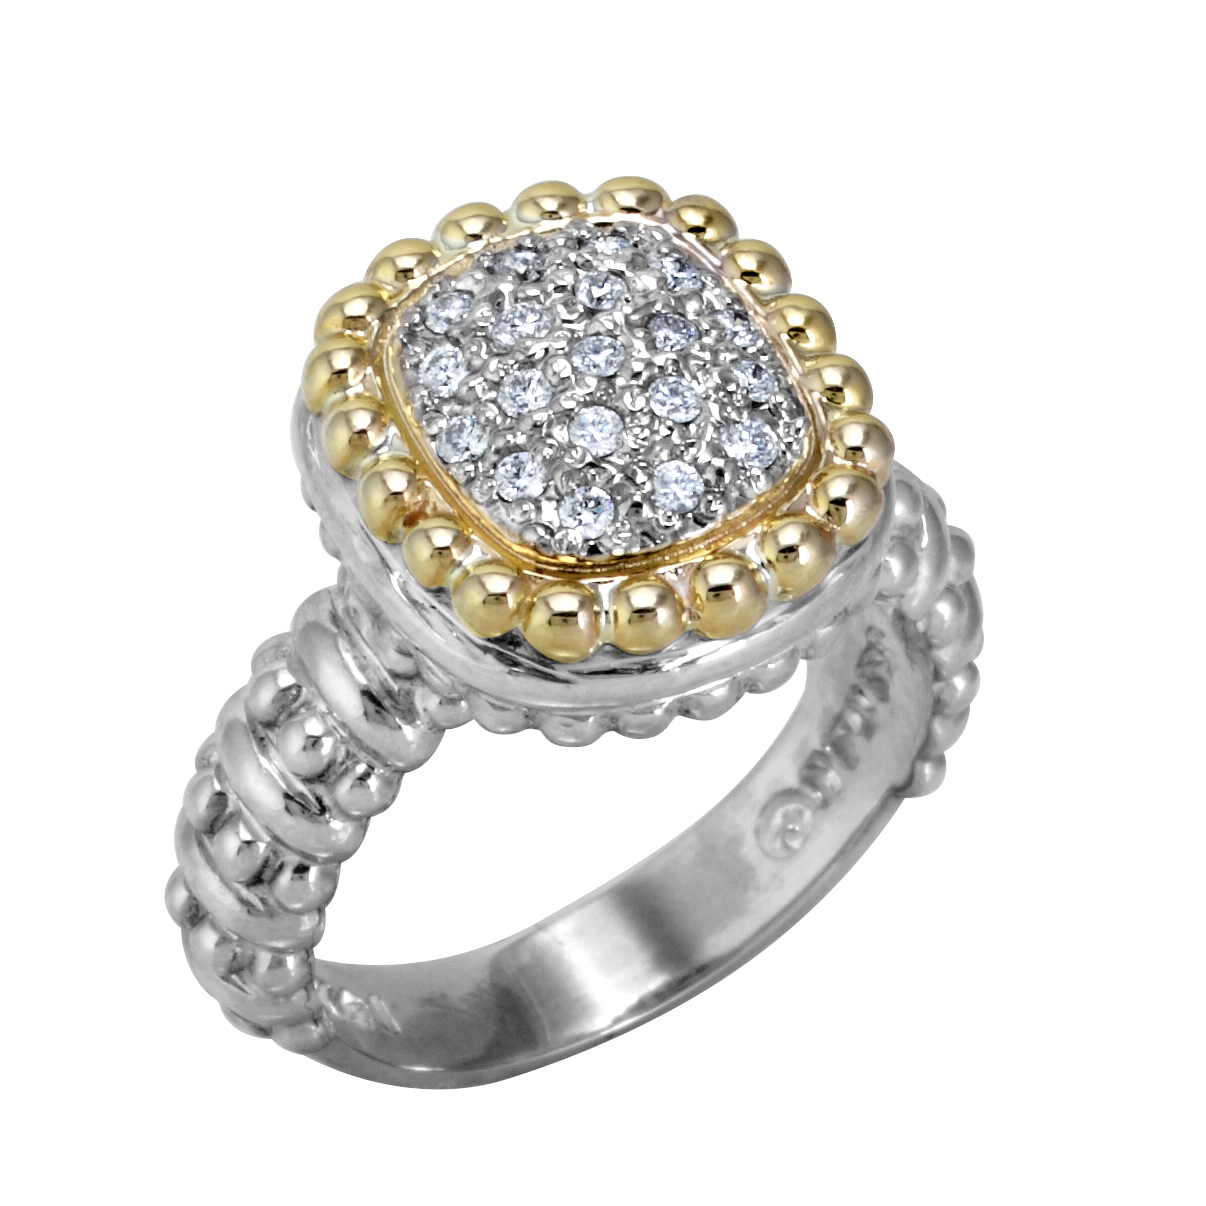 Multi-Pave Diamond Ring by Vahan - Talisman Collection Fine Jewelers